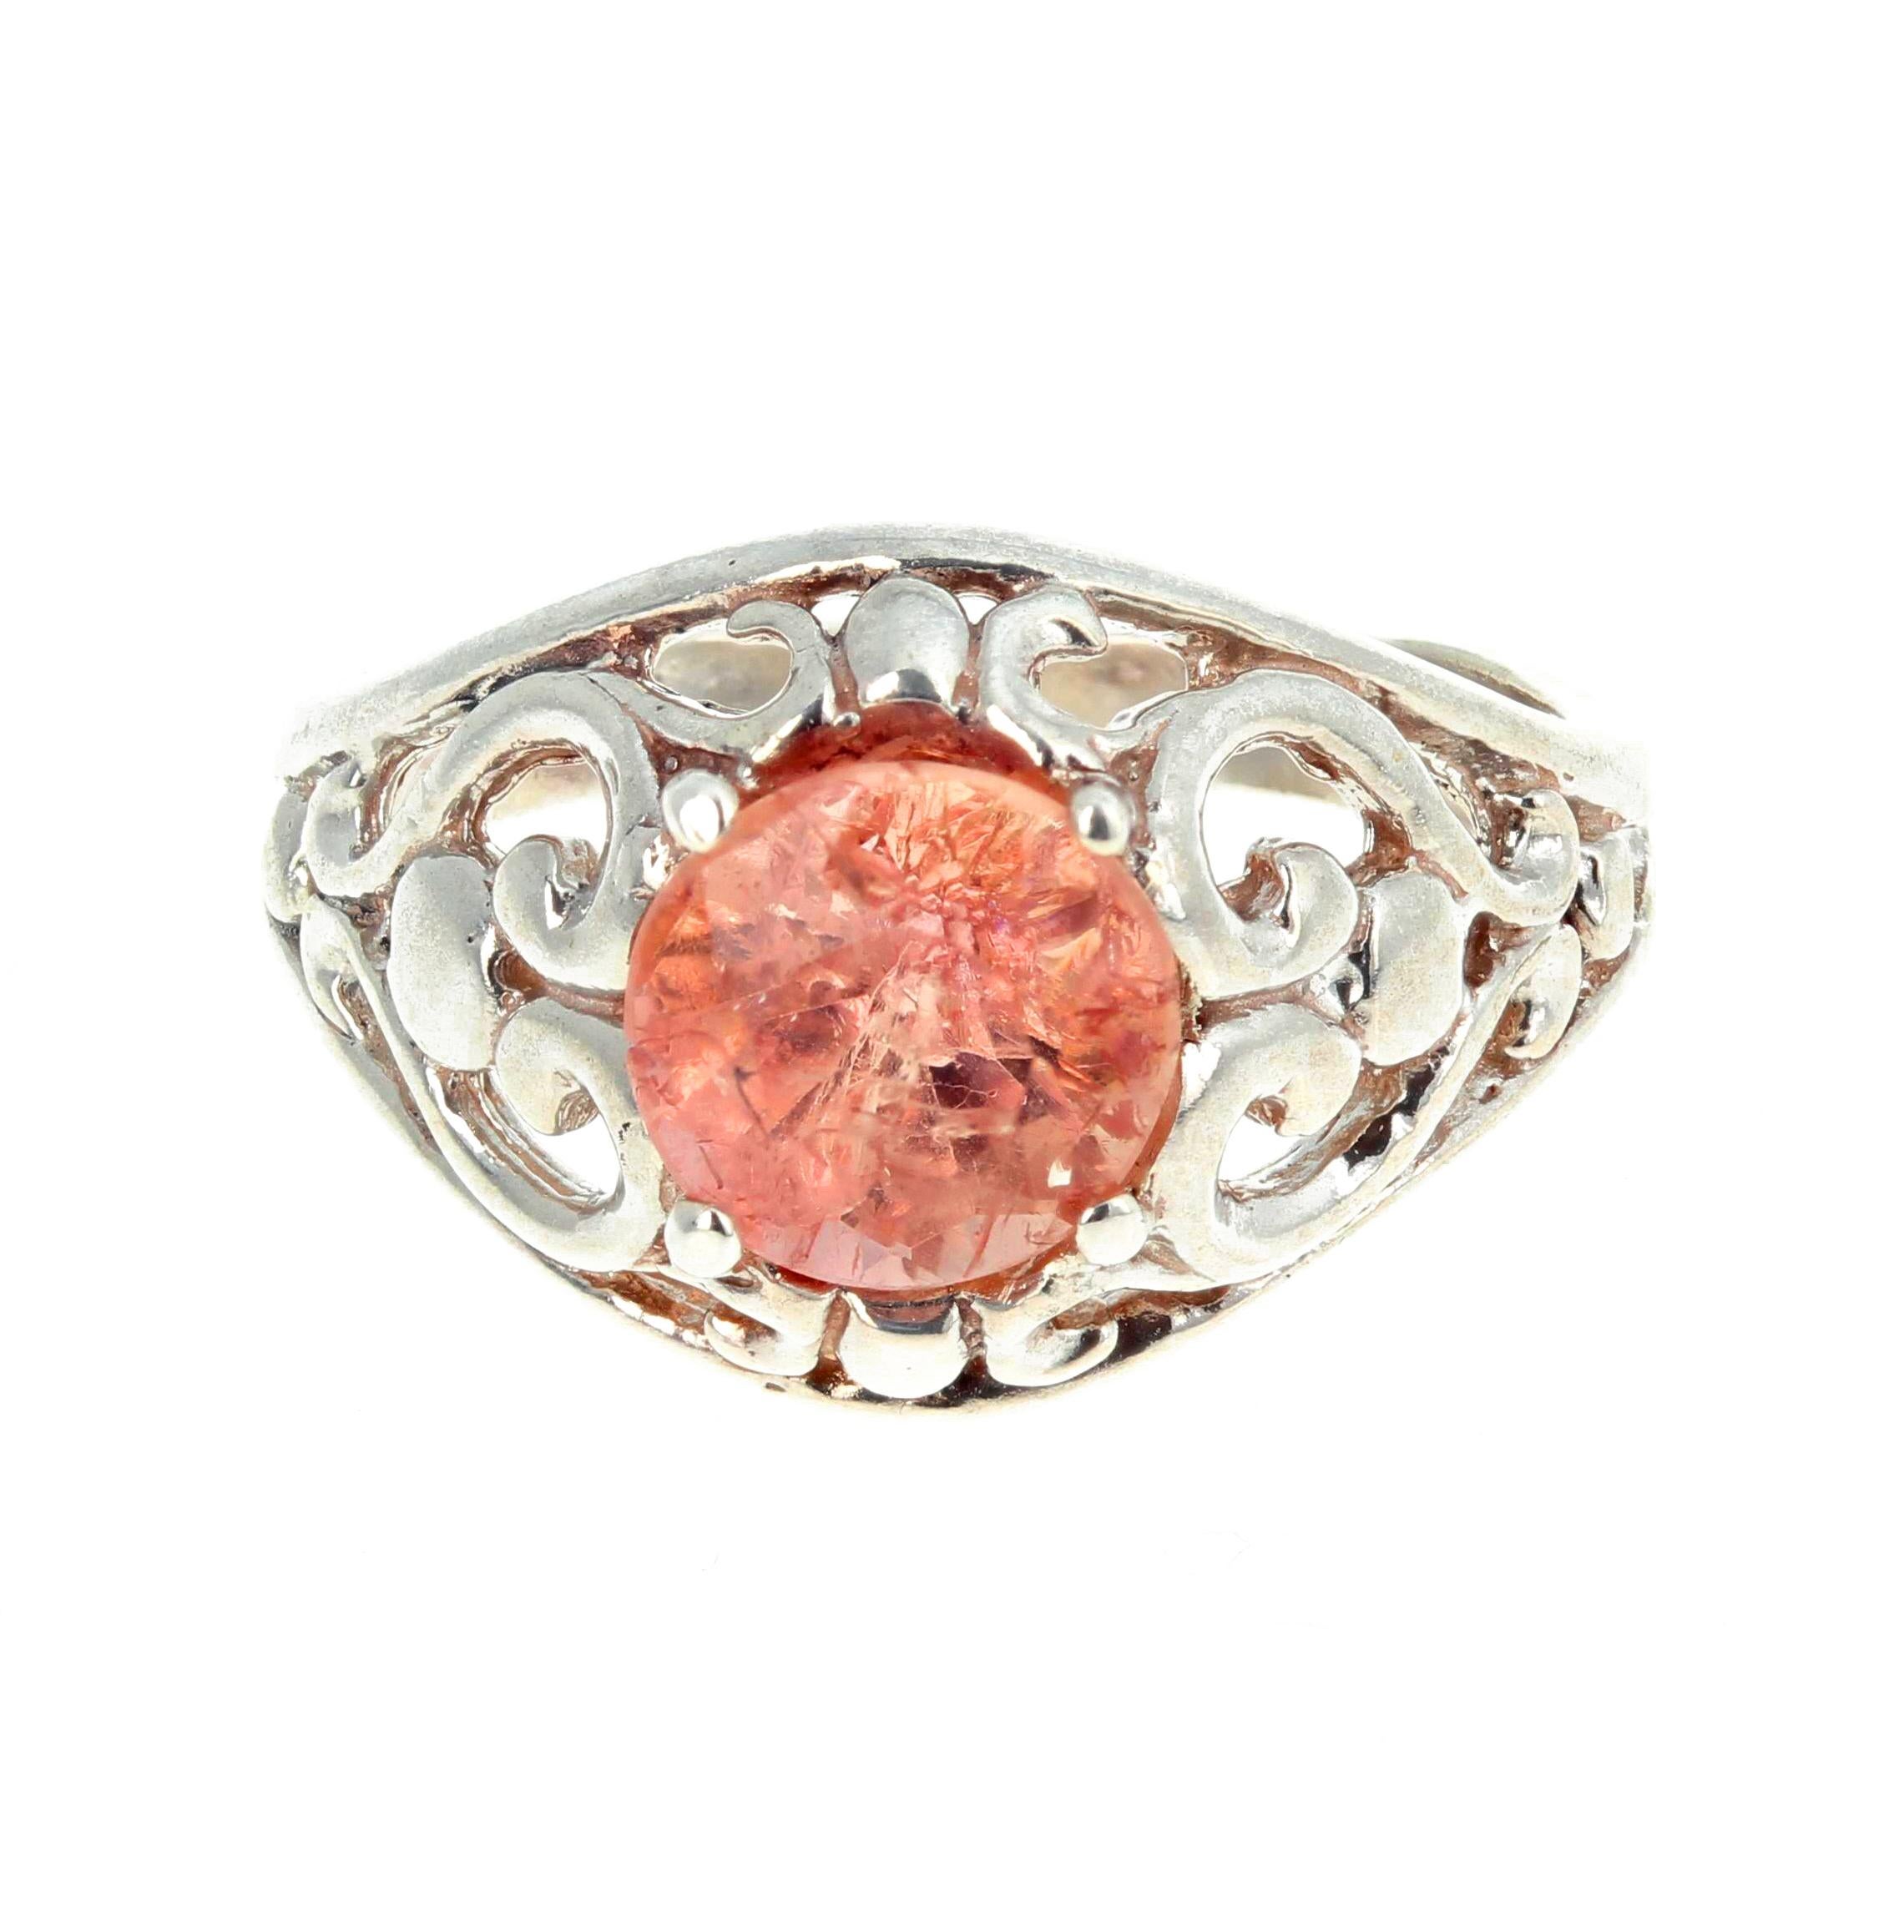 7 mm round brilliant sparkling natural apricot/pinky uniquely rare Imperial Topaz set in a sterling silver handmade ring size 6 (easily sizable).  This is much prettier than its picture and its natural inclusions make it sparkle more..   More from